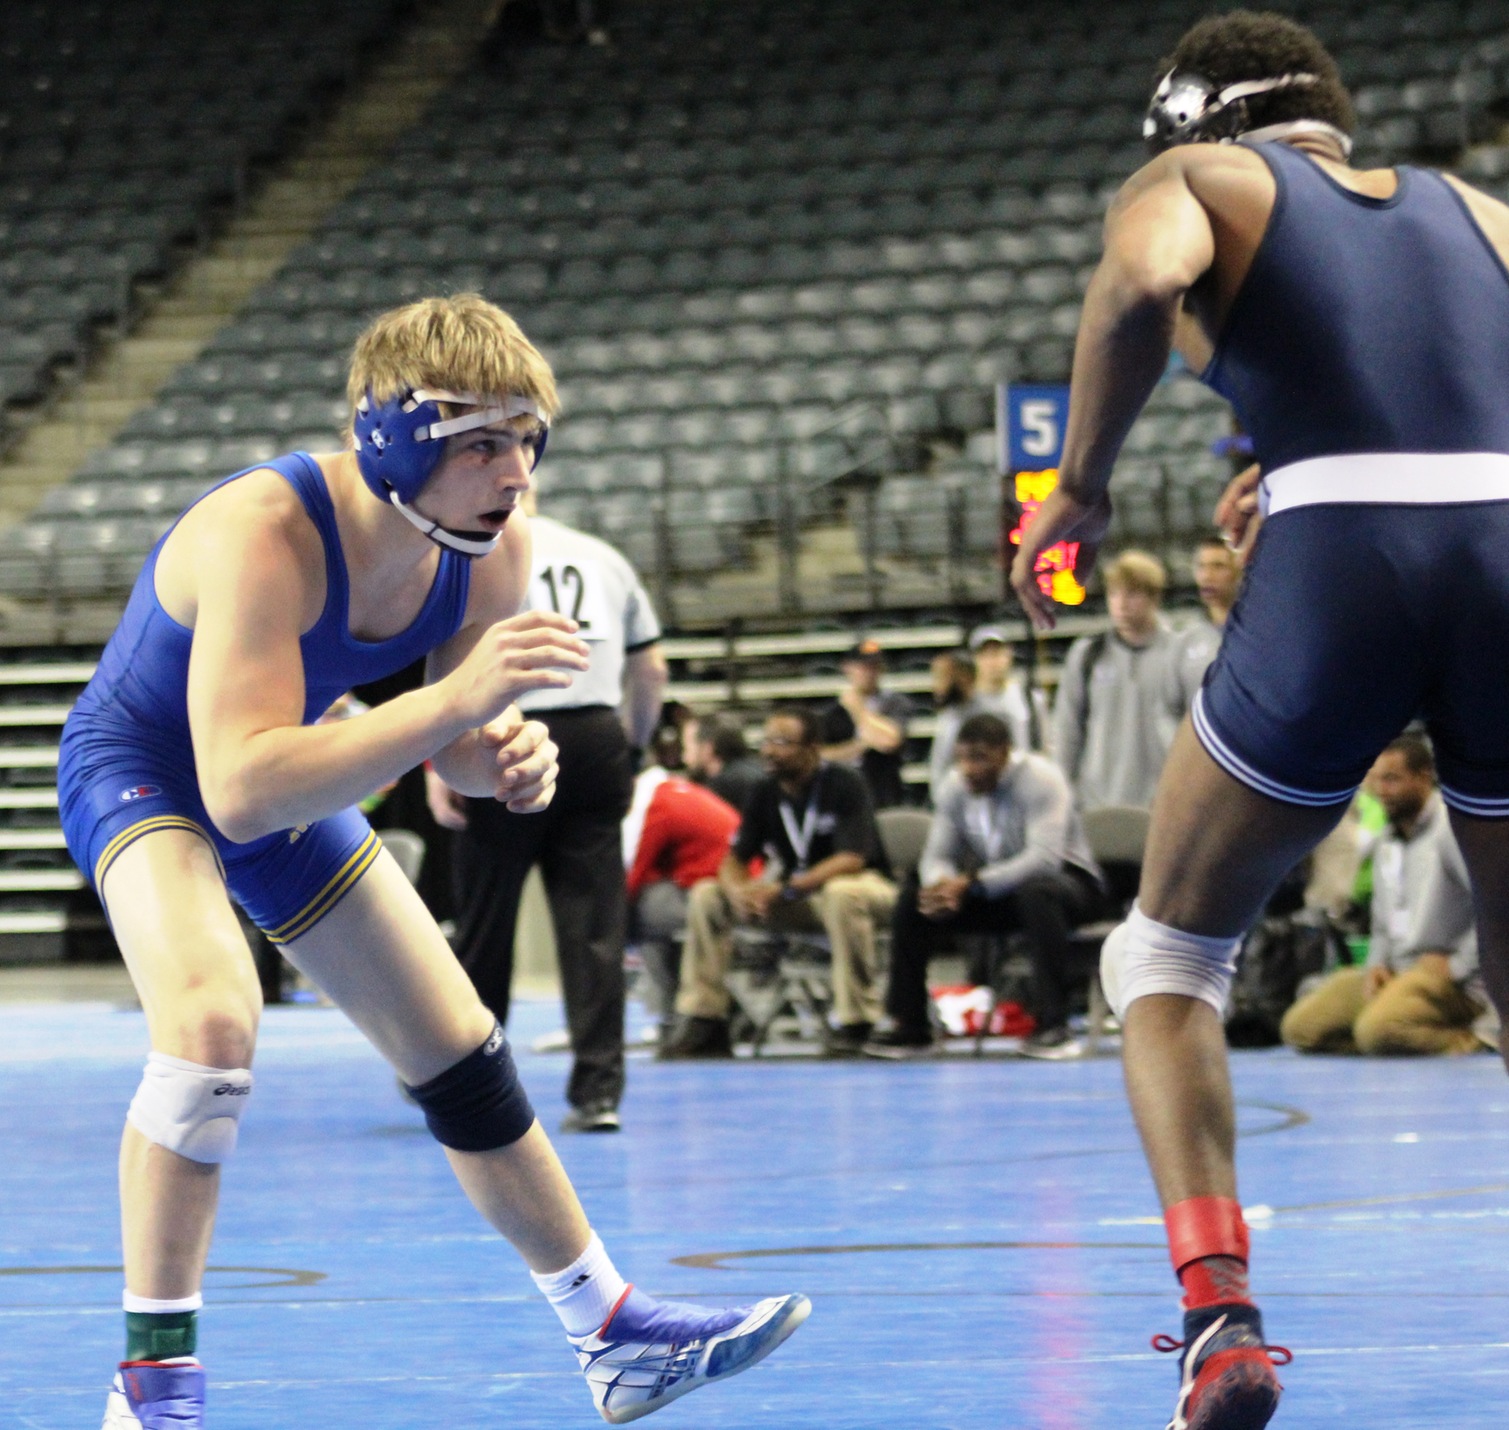 NIACC's Austin Anderly is ranked No. 1 in the NJCAA Intermat preseason poll at 141 pounds.